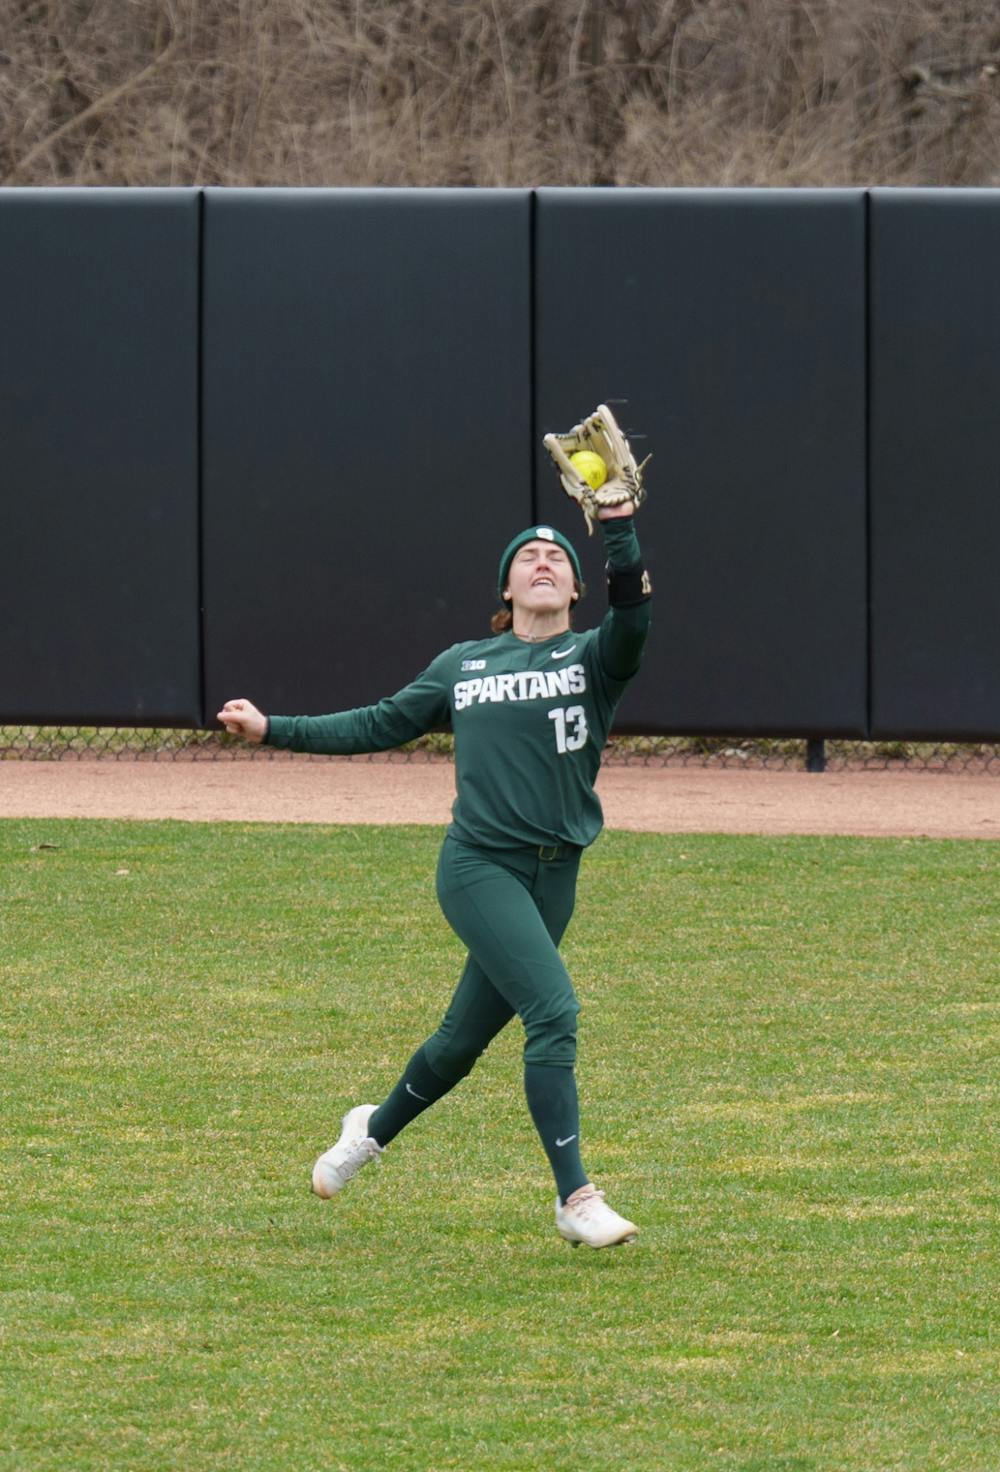 <p>Michigan State senior Abby Joseph catches the ball making another out for Nebraska. Spartans lost 6-0 against Nebraska, on April 9, 2022.</p>